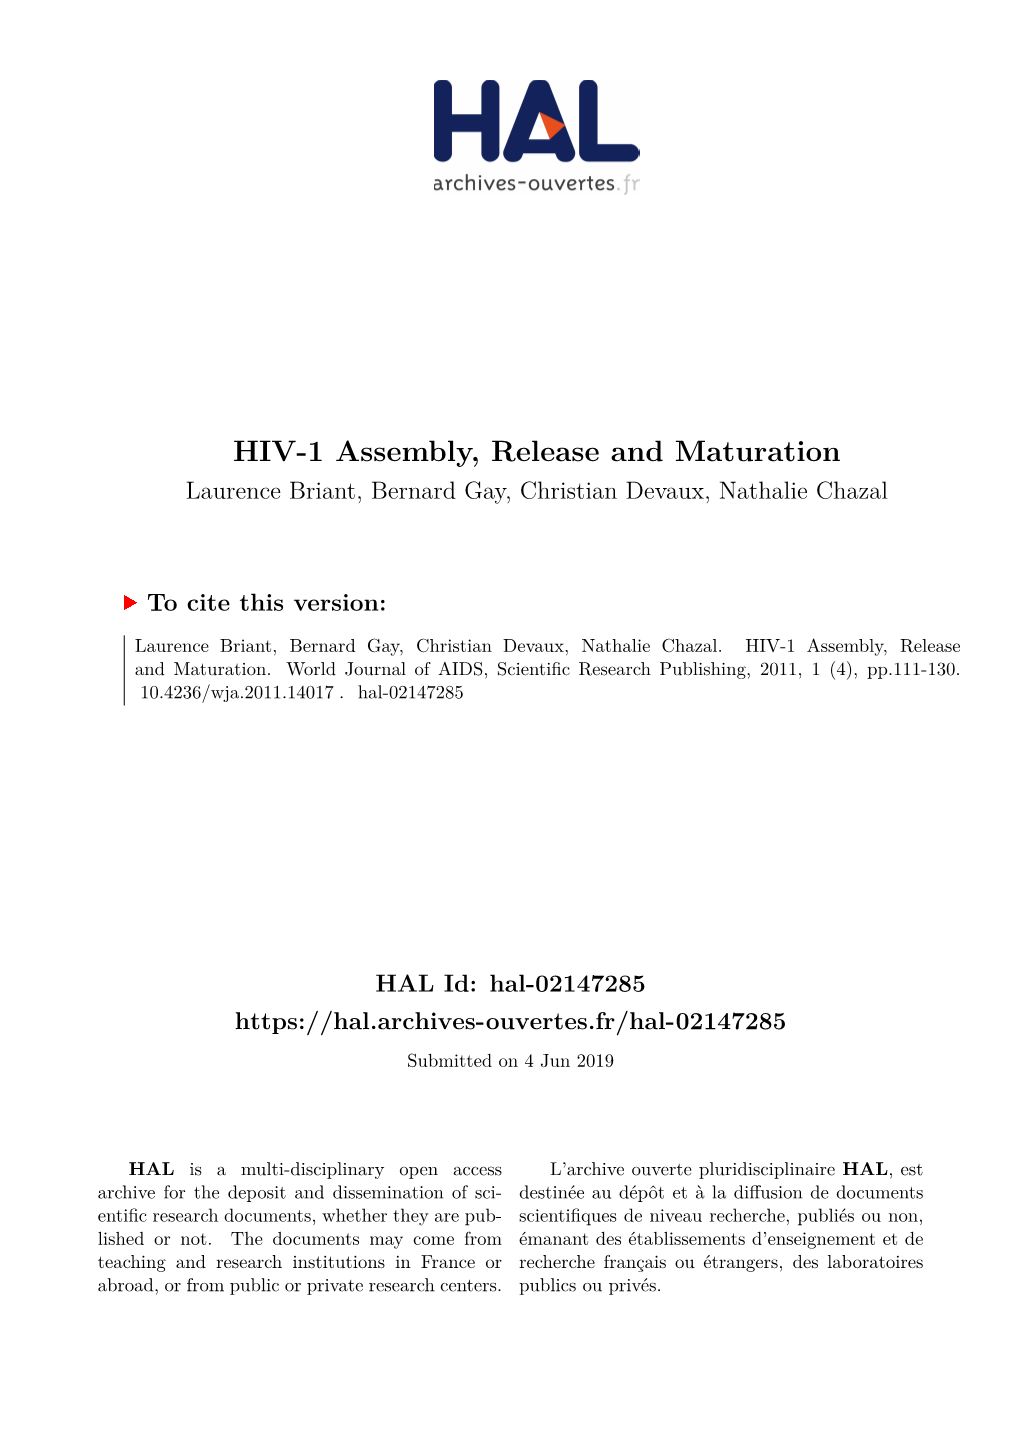 HIV-1 Assembly, Release and Maturation Laurence Briant, Bernard Gay, Christian Devaux, Nathalie Chazal